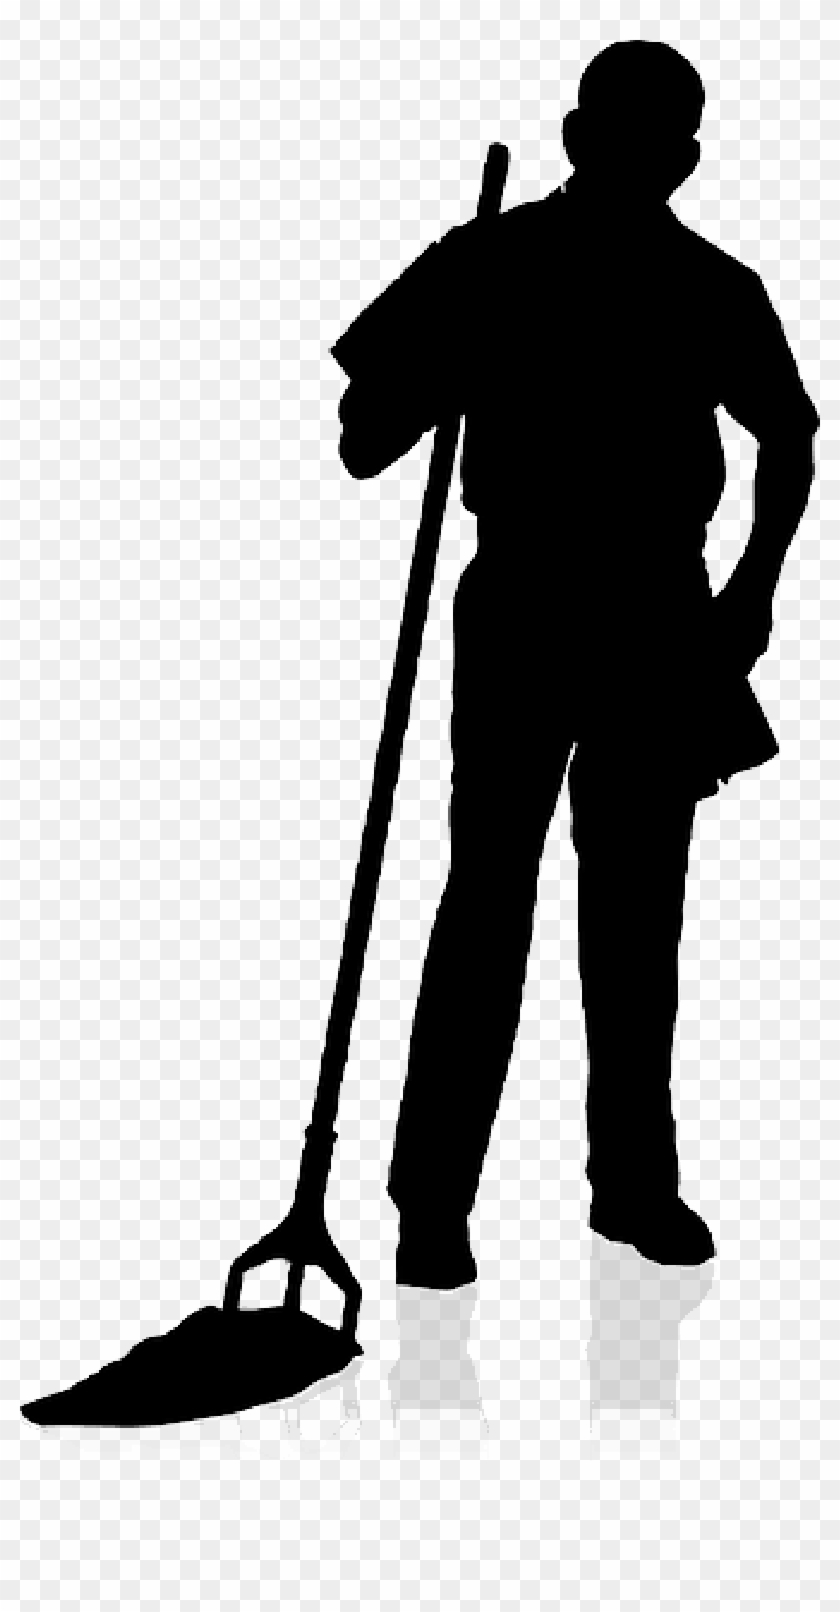 Clipart - Janitor Silhouette Png Transparent Png #918509